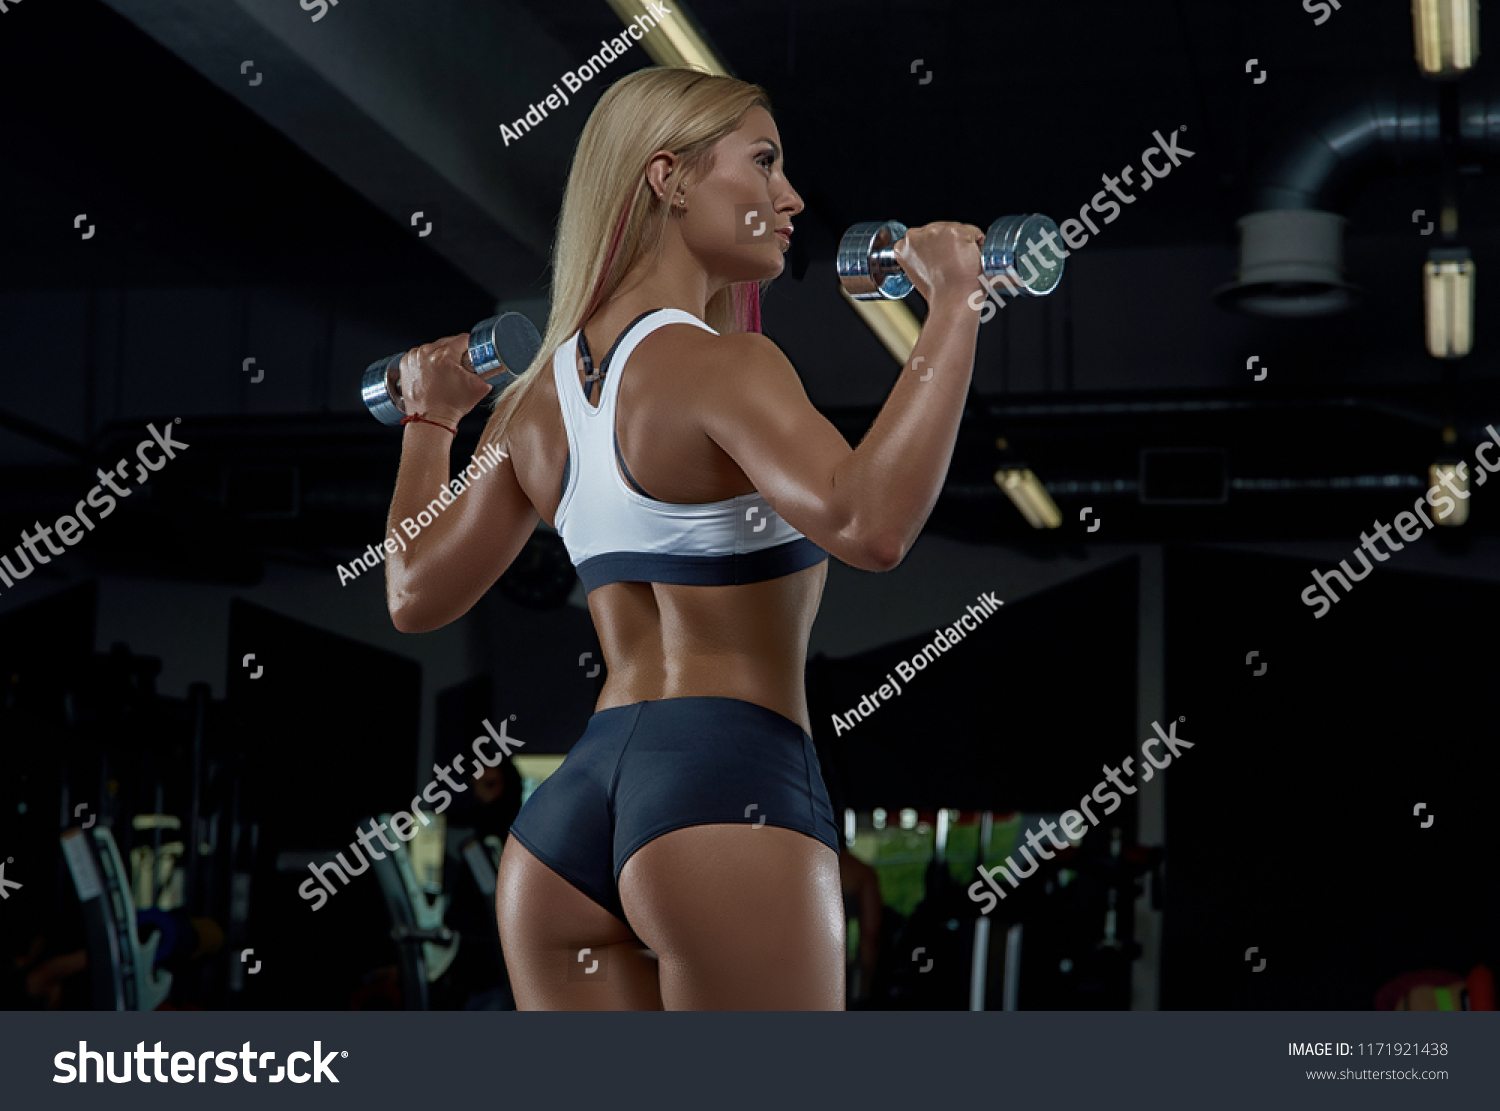 A young smart girl posing in the gym. Dark background. #1171921438